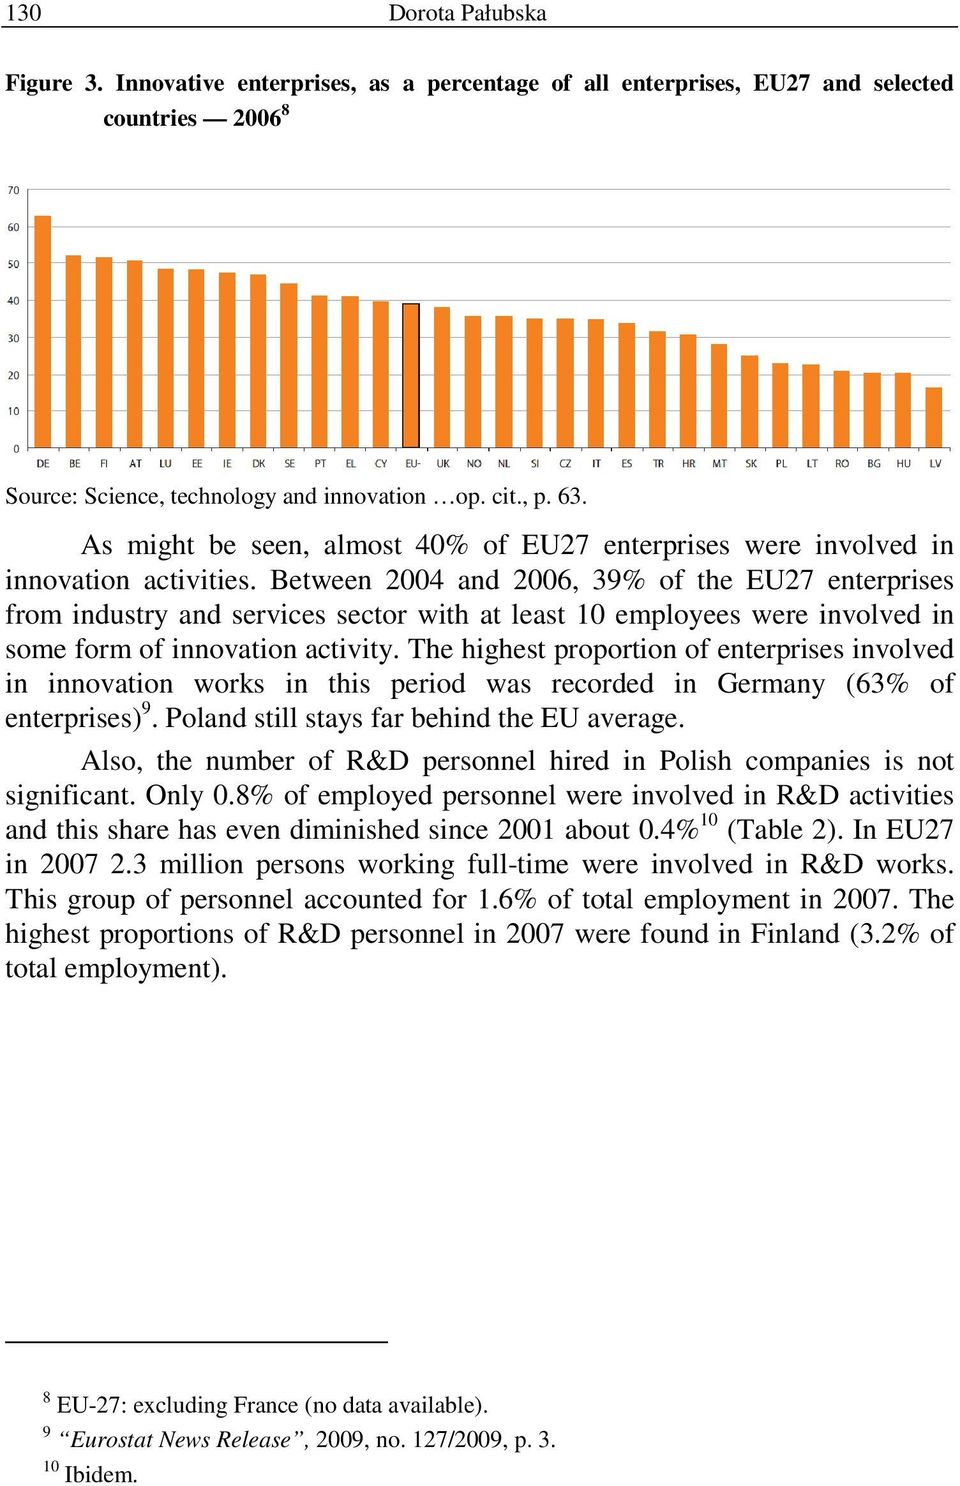 Between 2004 and 2006, 39% of the EU27 enterprises from industry and services sector with at least 10 employees were involved in some form of innovation activity.